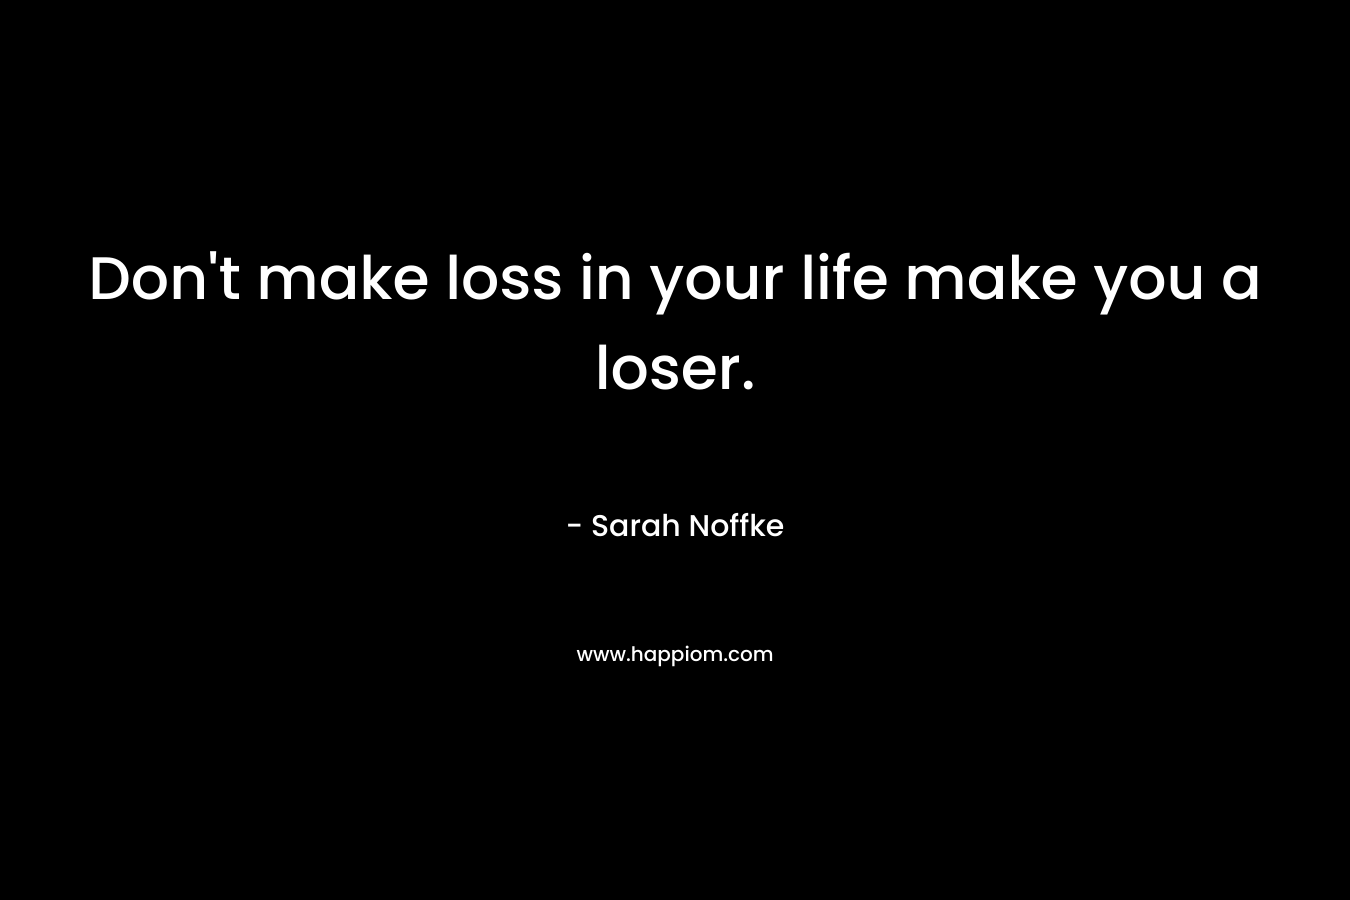 Don’t make loss in your life make you a loser. – Sarah Noffke